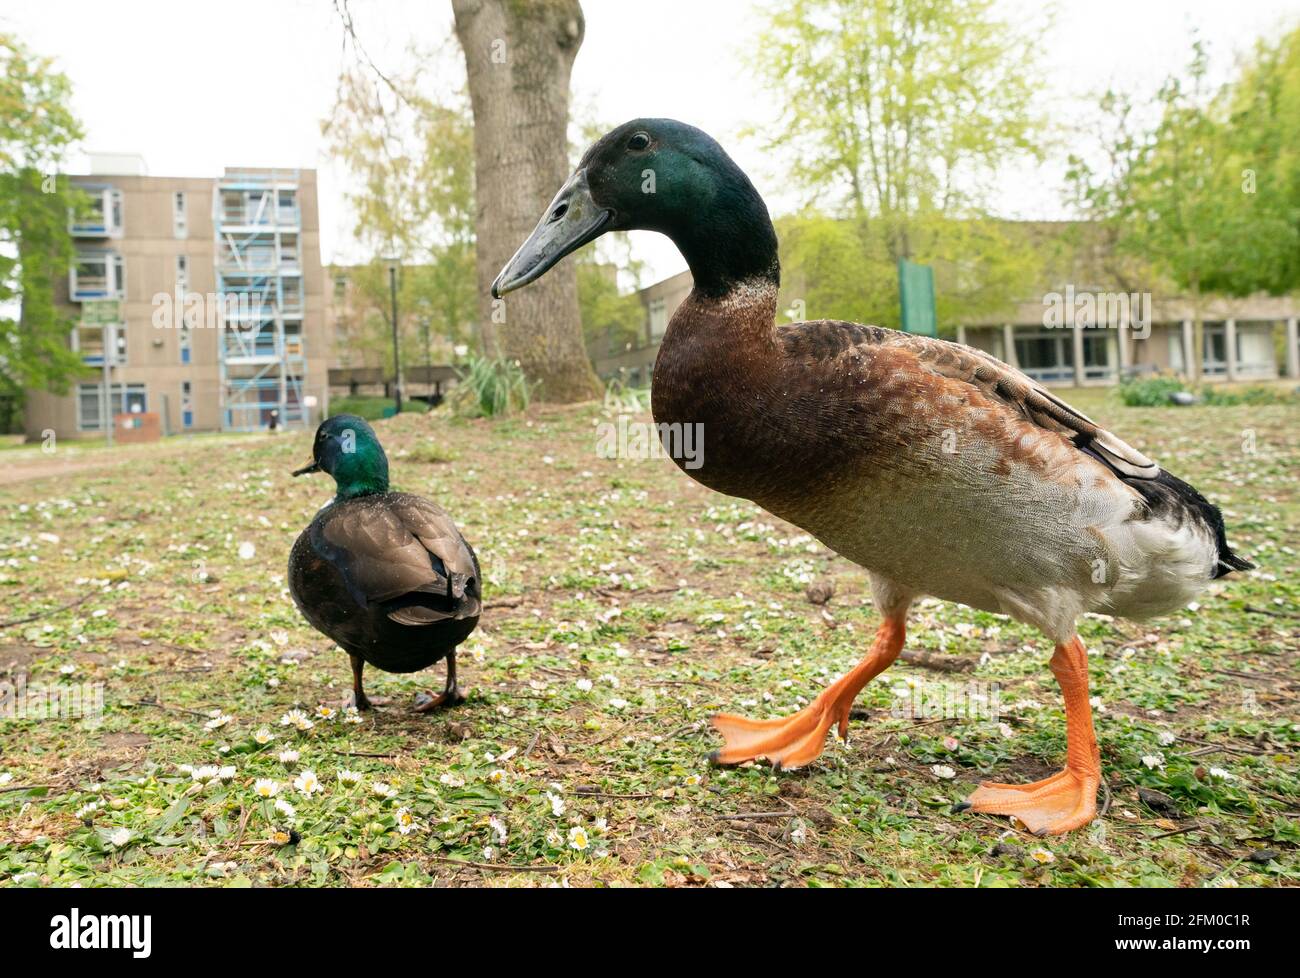 York university campus duck named Long Boi (left) who went viral due to his impressive stature. It is believed that the very large duck is a cross between a Mallard and an Indian Runner duck. Picture date: Monday May 3, 2021. Stock Photo